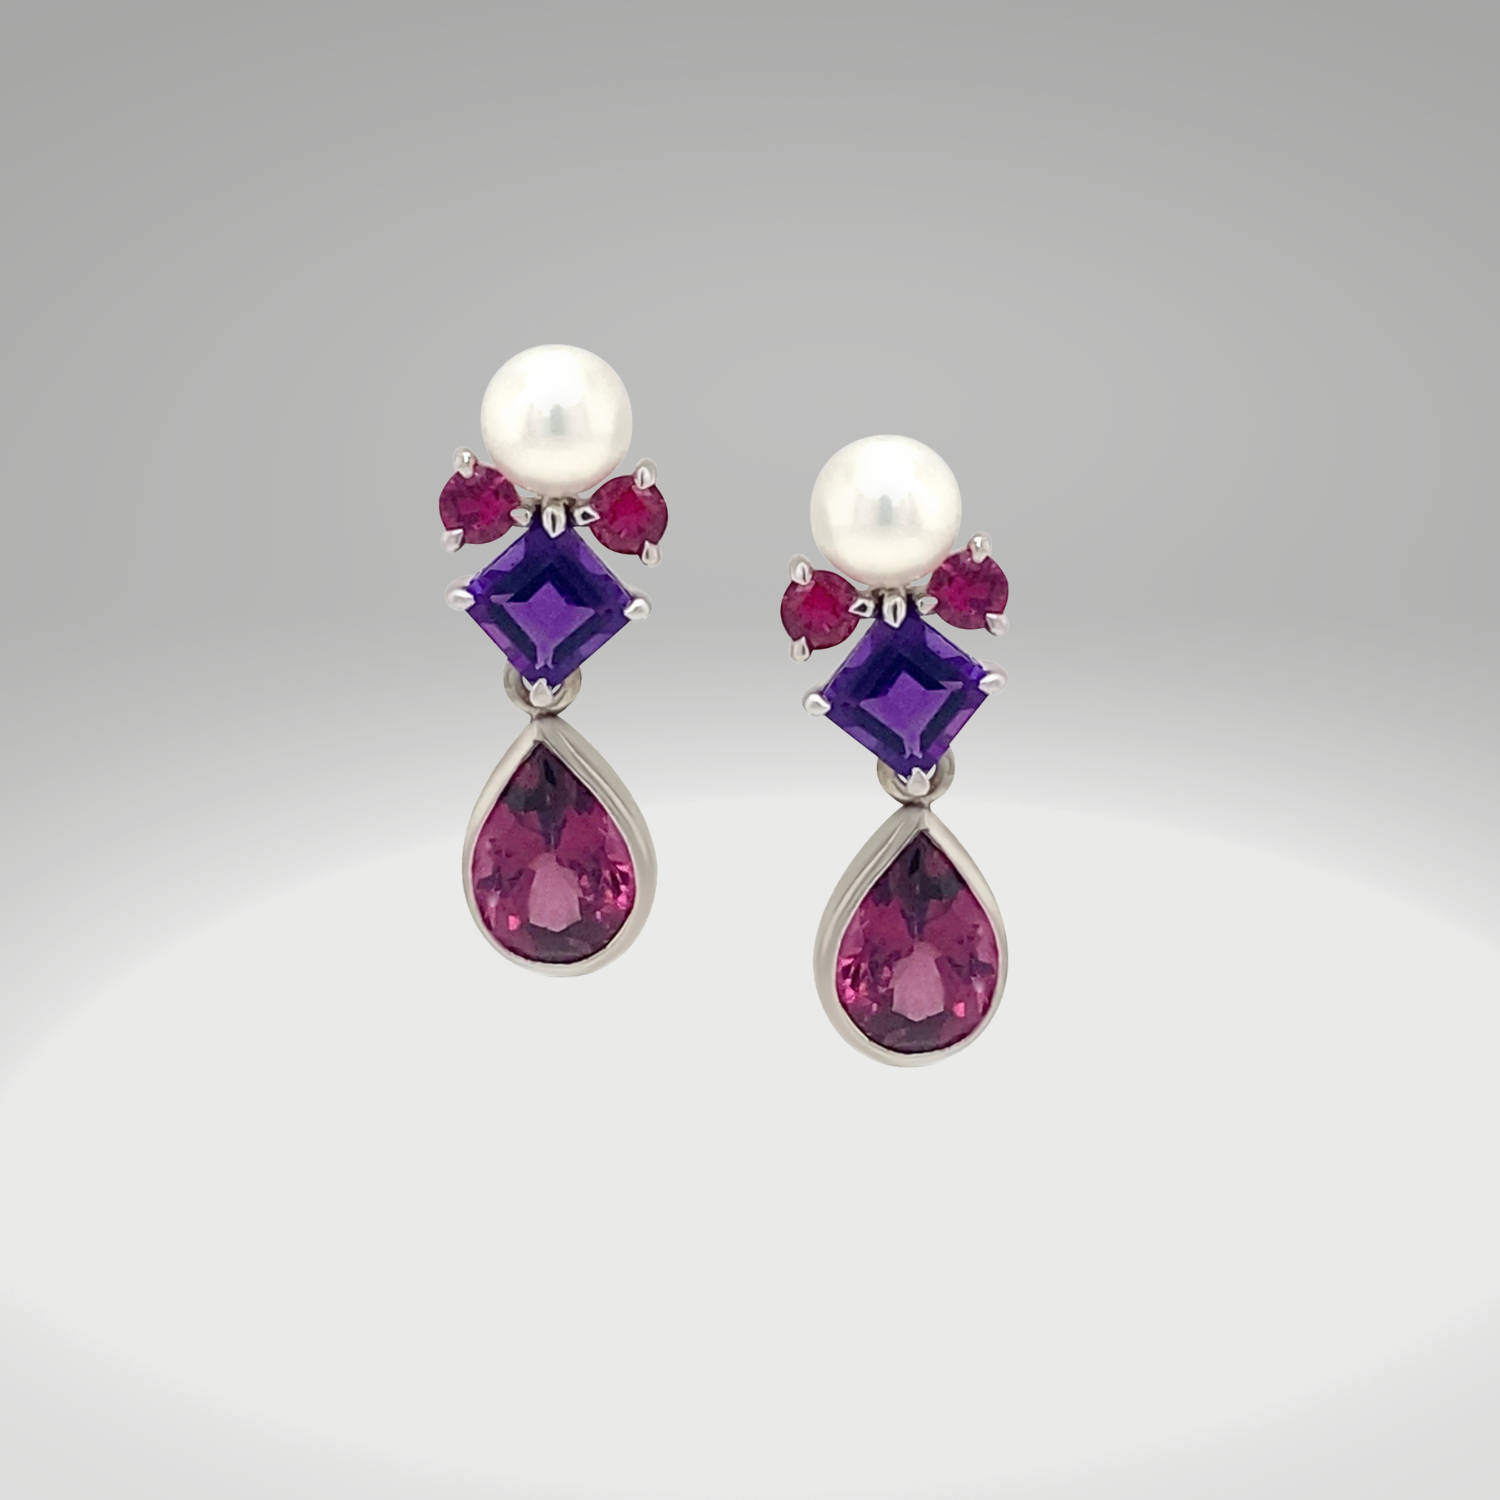 Angel Earrings with Amethyst, Ruby and Pearl worn with removable Rhodolite Garnet Drops (sold separately)